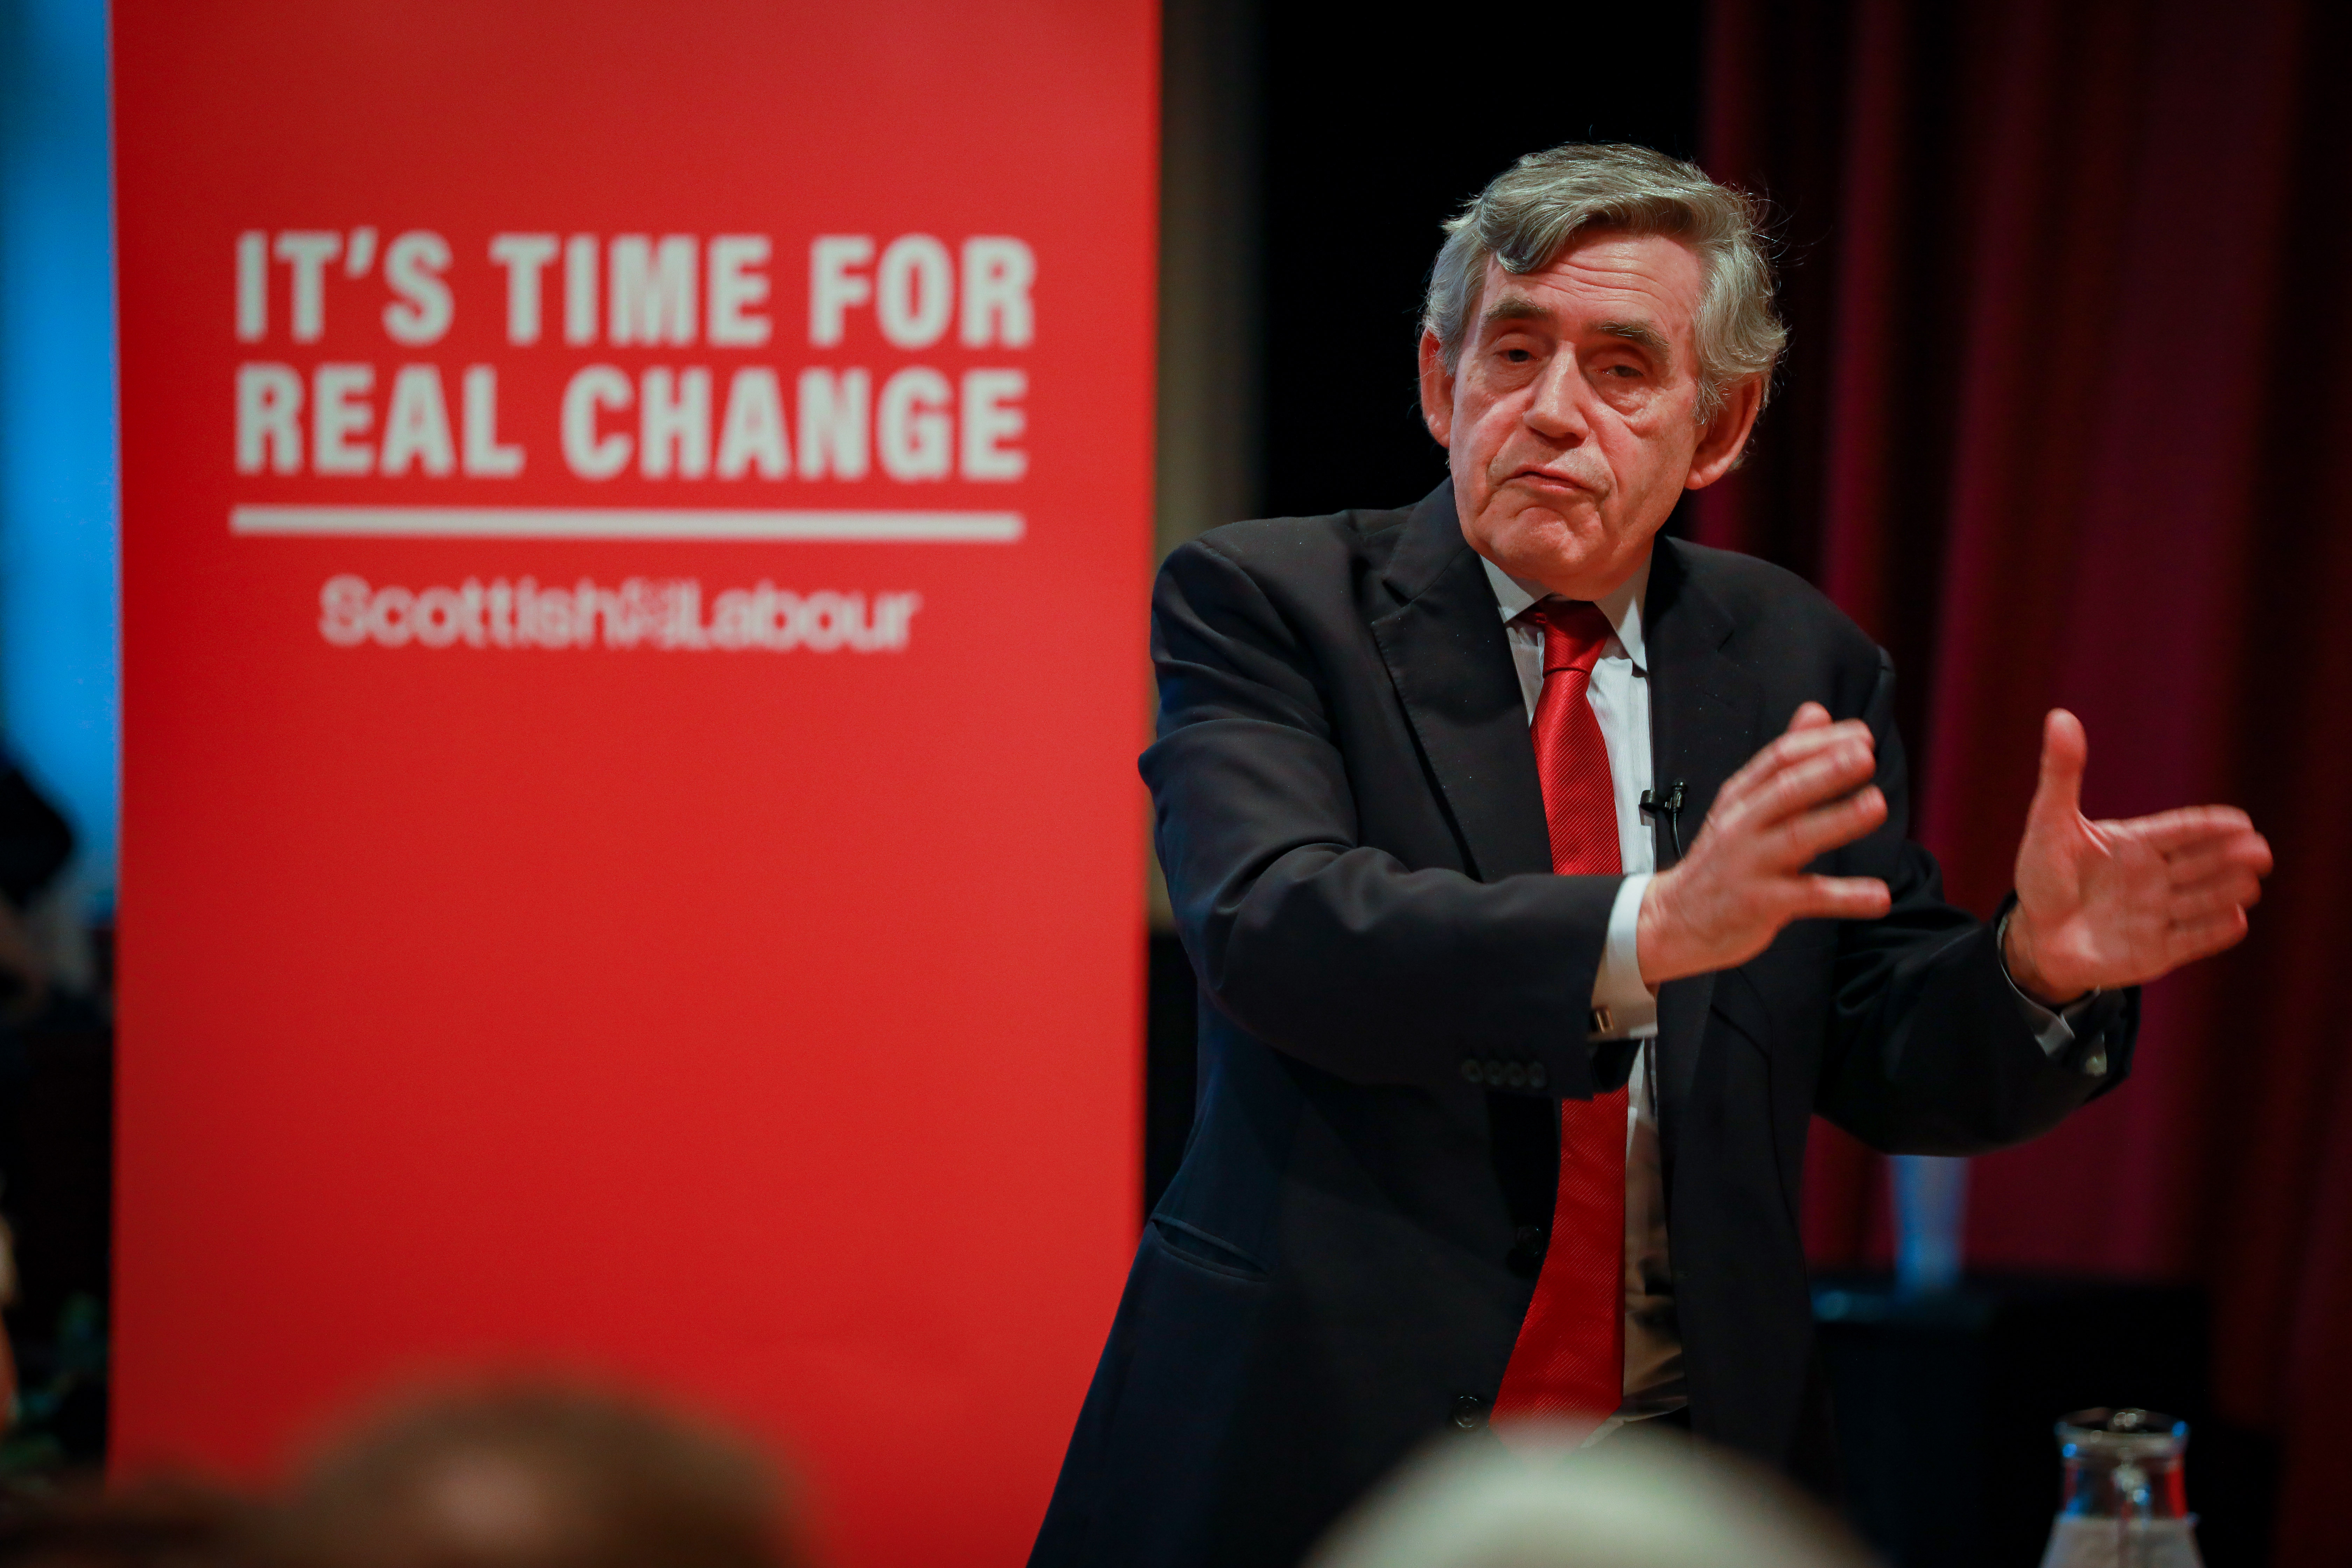 Gordon Brown was back in Kirkcaldy to support activists and the four Fife Labour candidates.